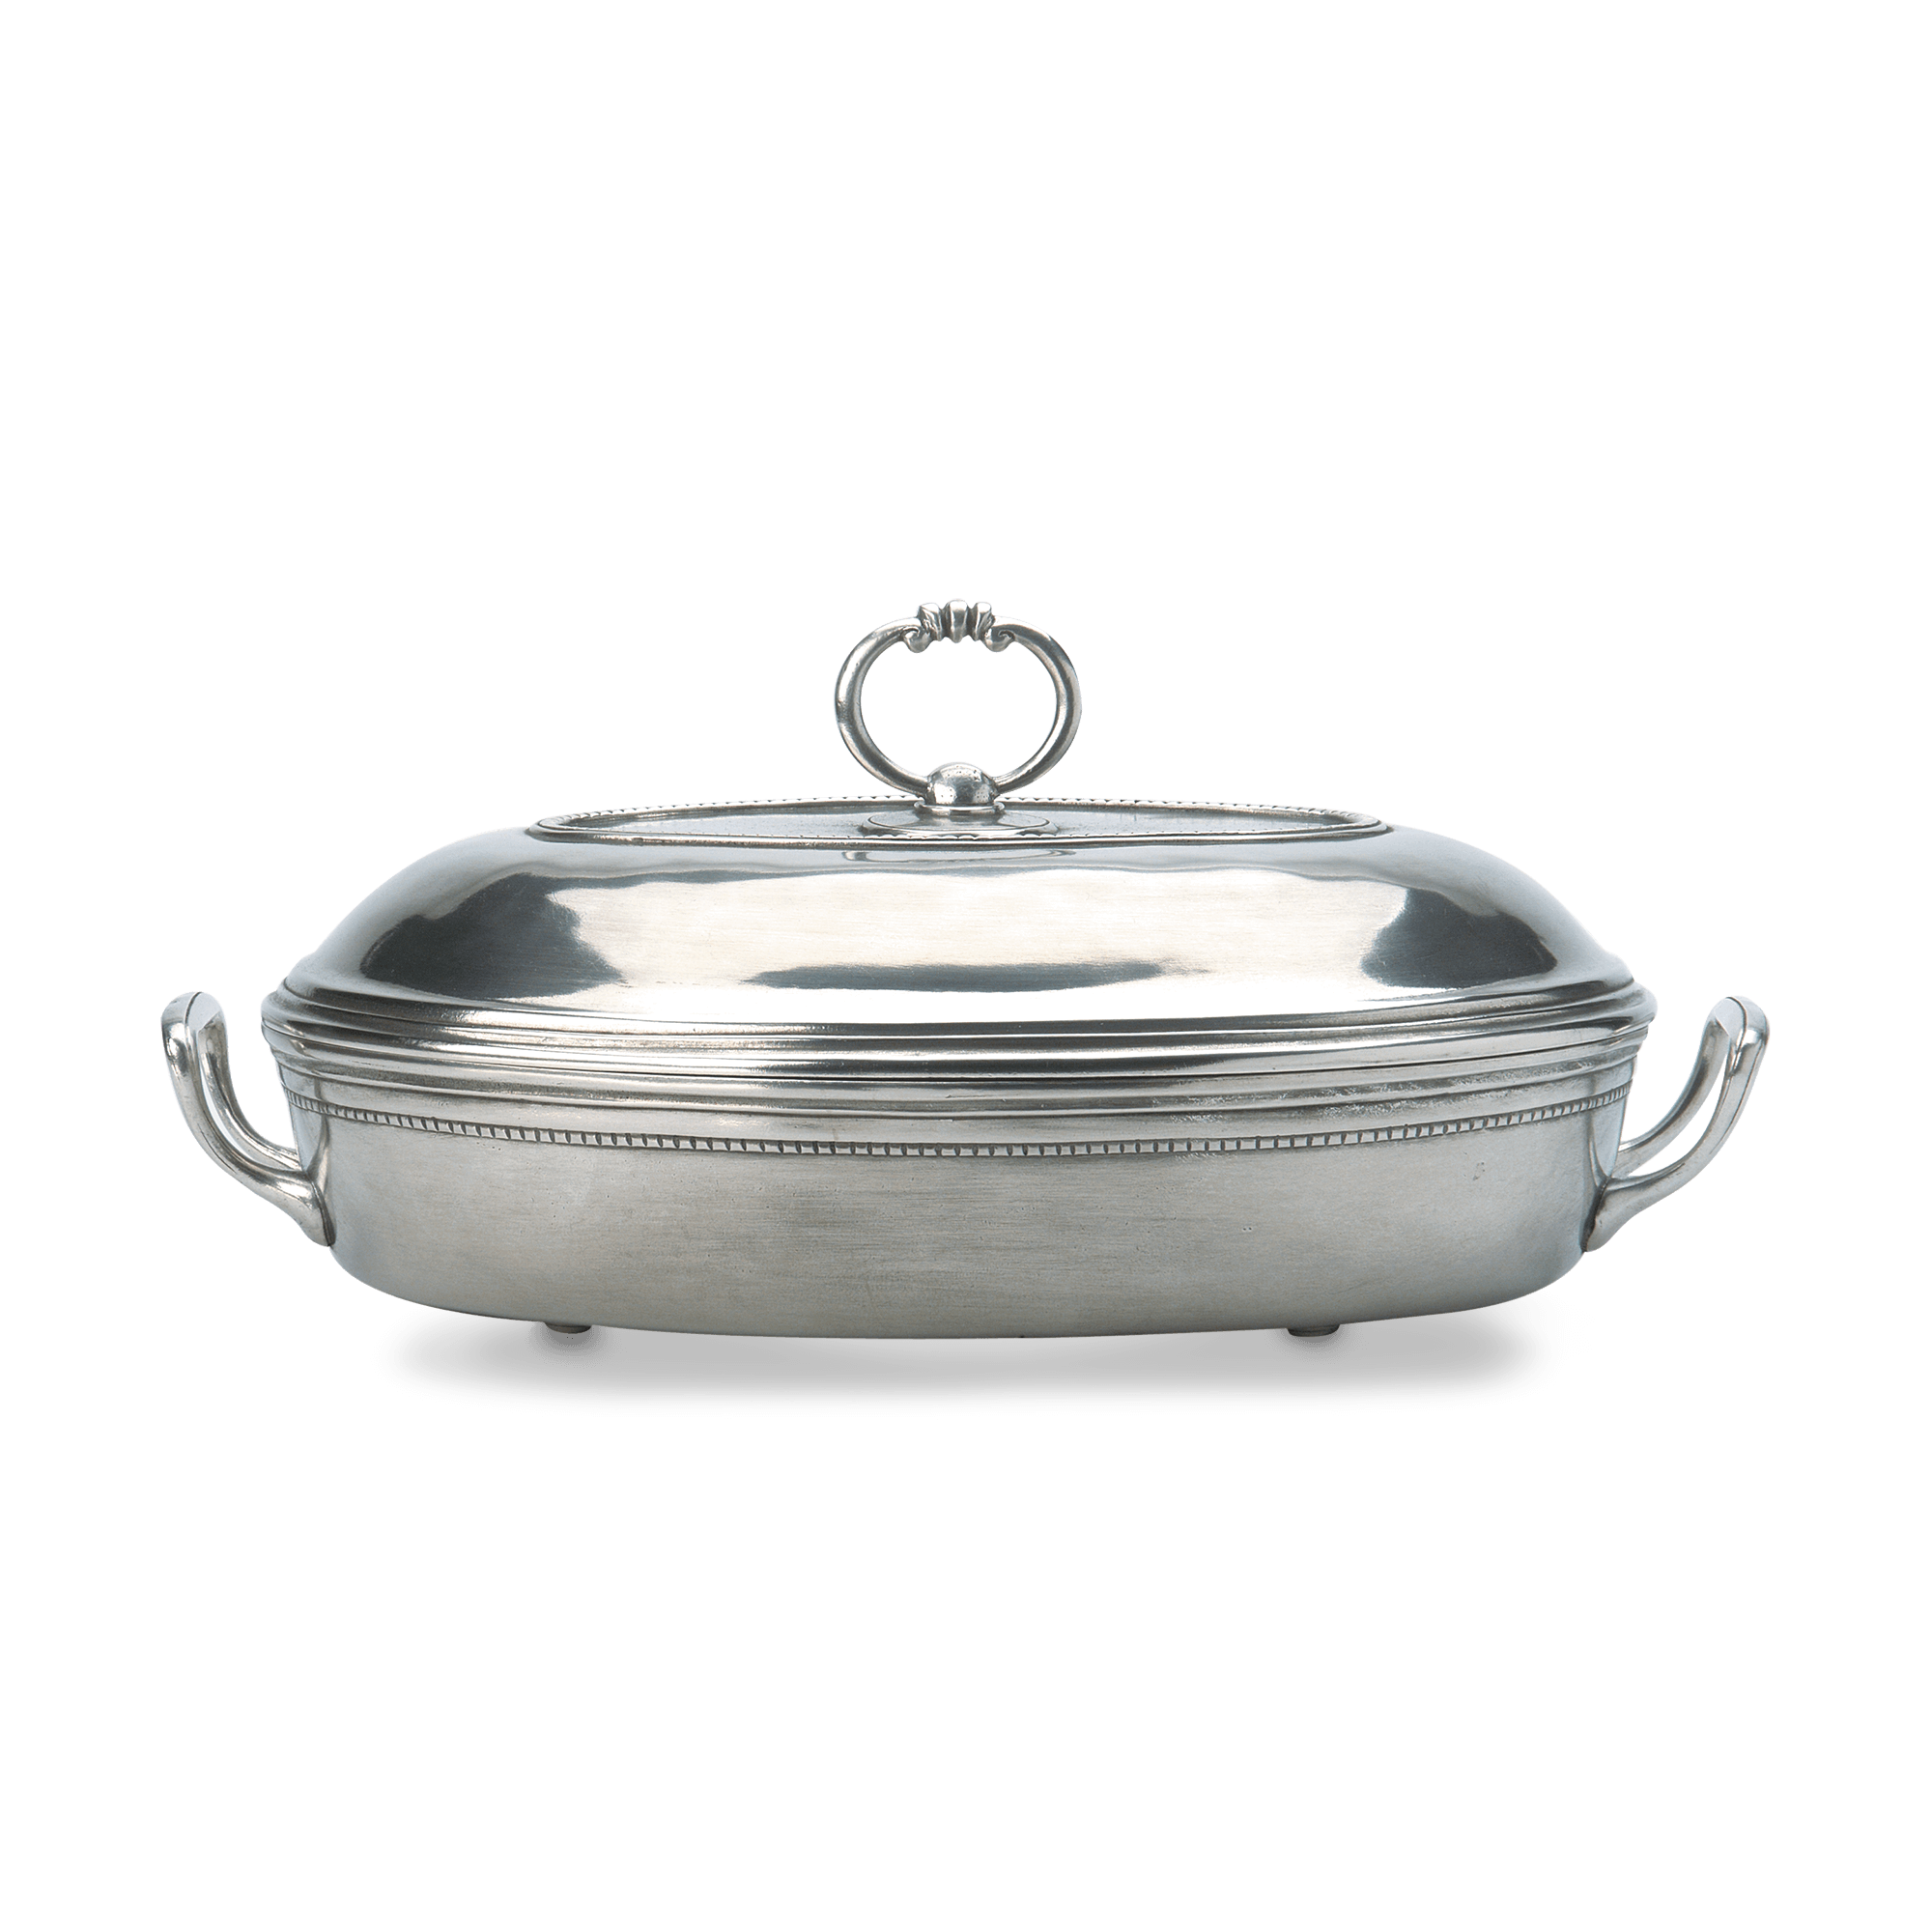 MATCH Pewter Toscana Pyrex Casserole Dish with Lid